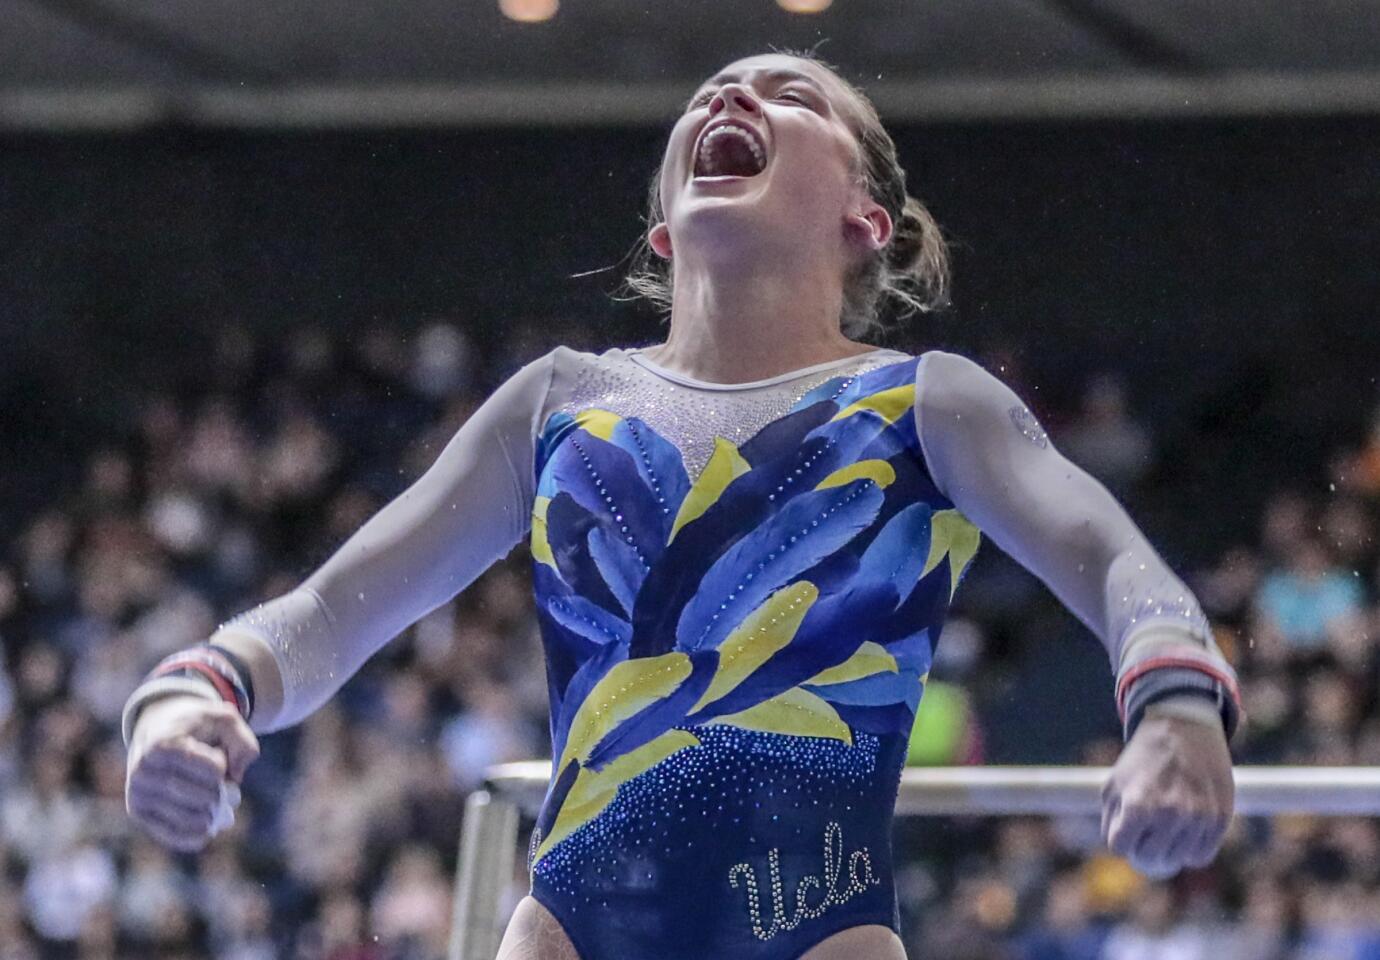 UCLA's Norah Flatley celebrates after finishing her bars routine at the Collegiate Challenge gymnastics meet.